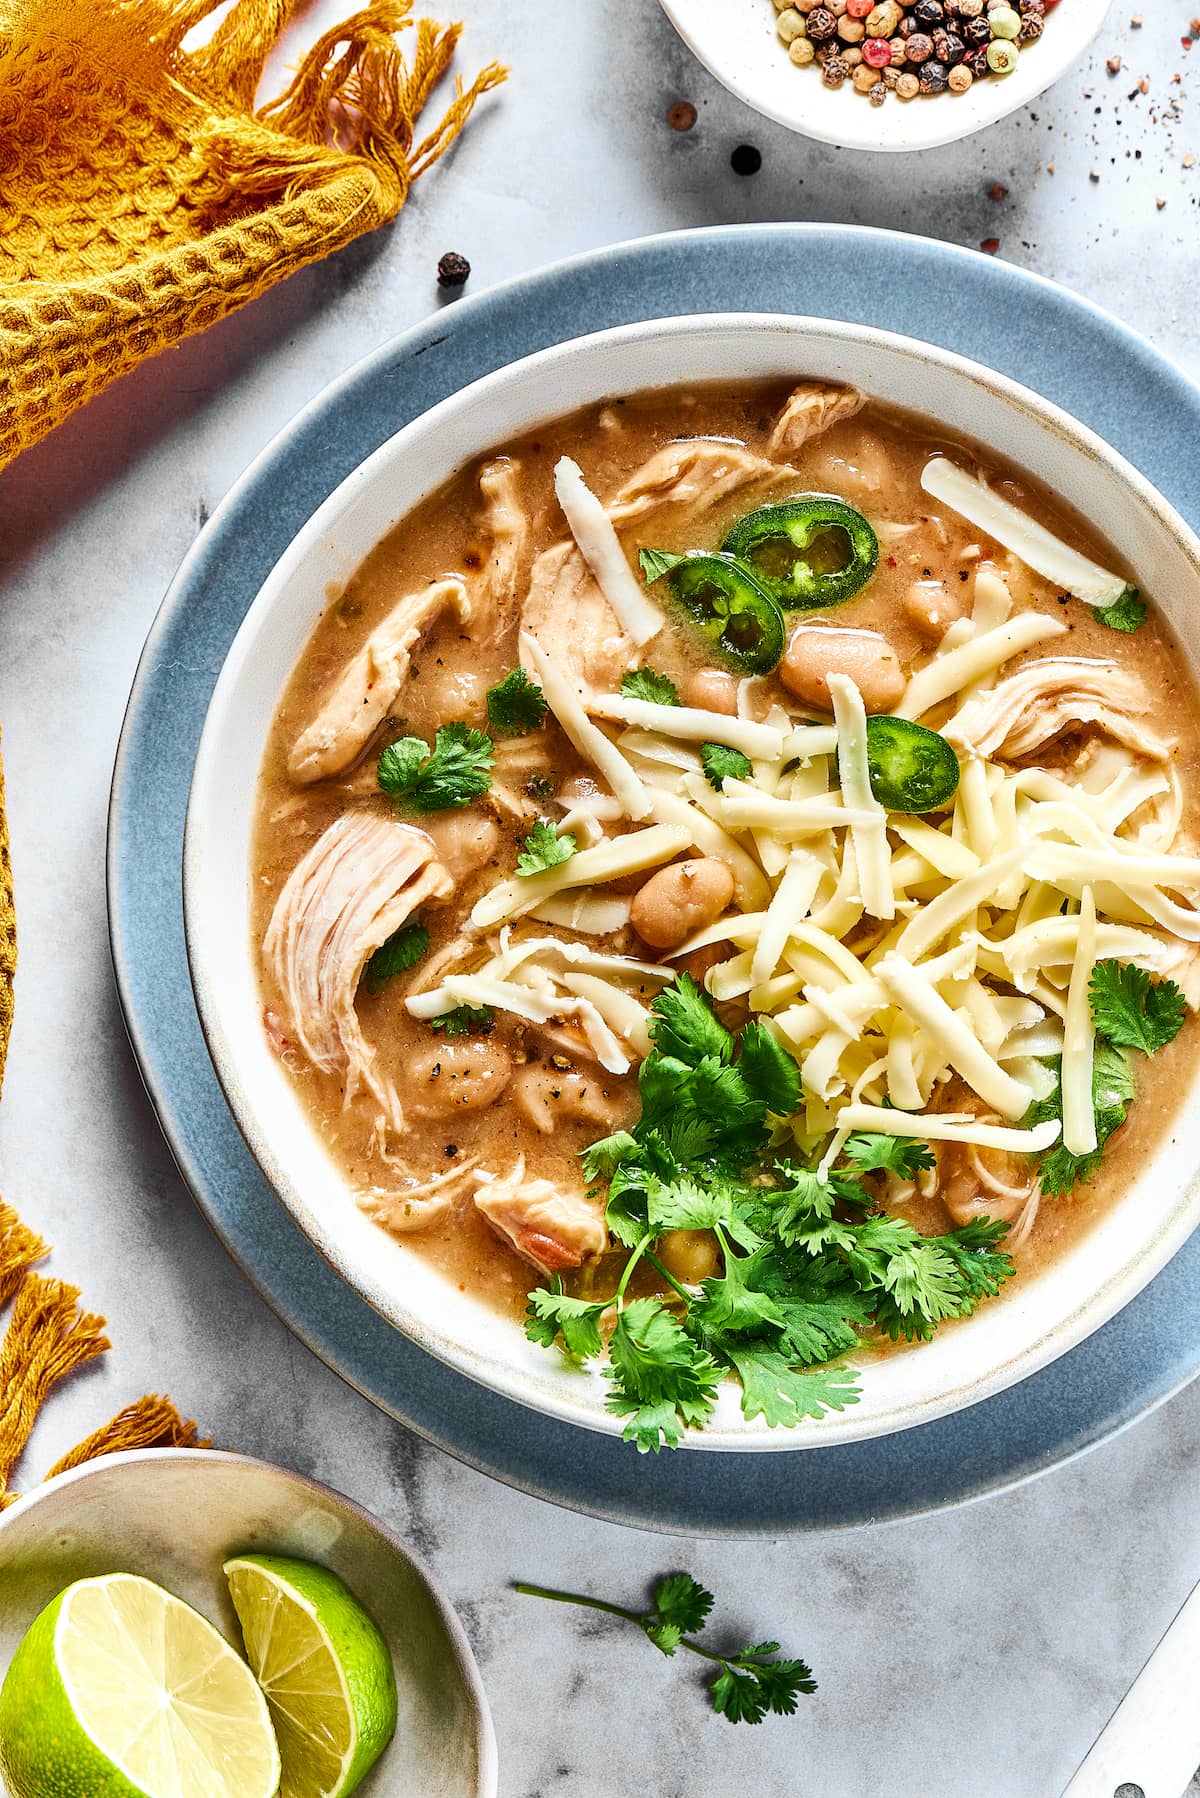 Overhead view of a bowl of white chicken chili garnished with fresh cilantro.